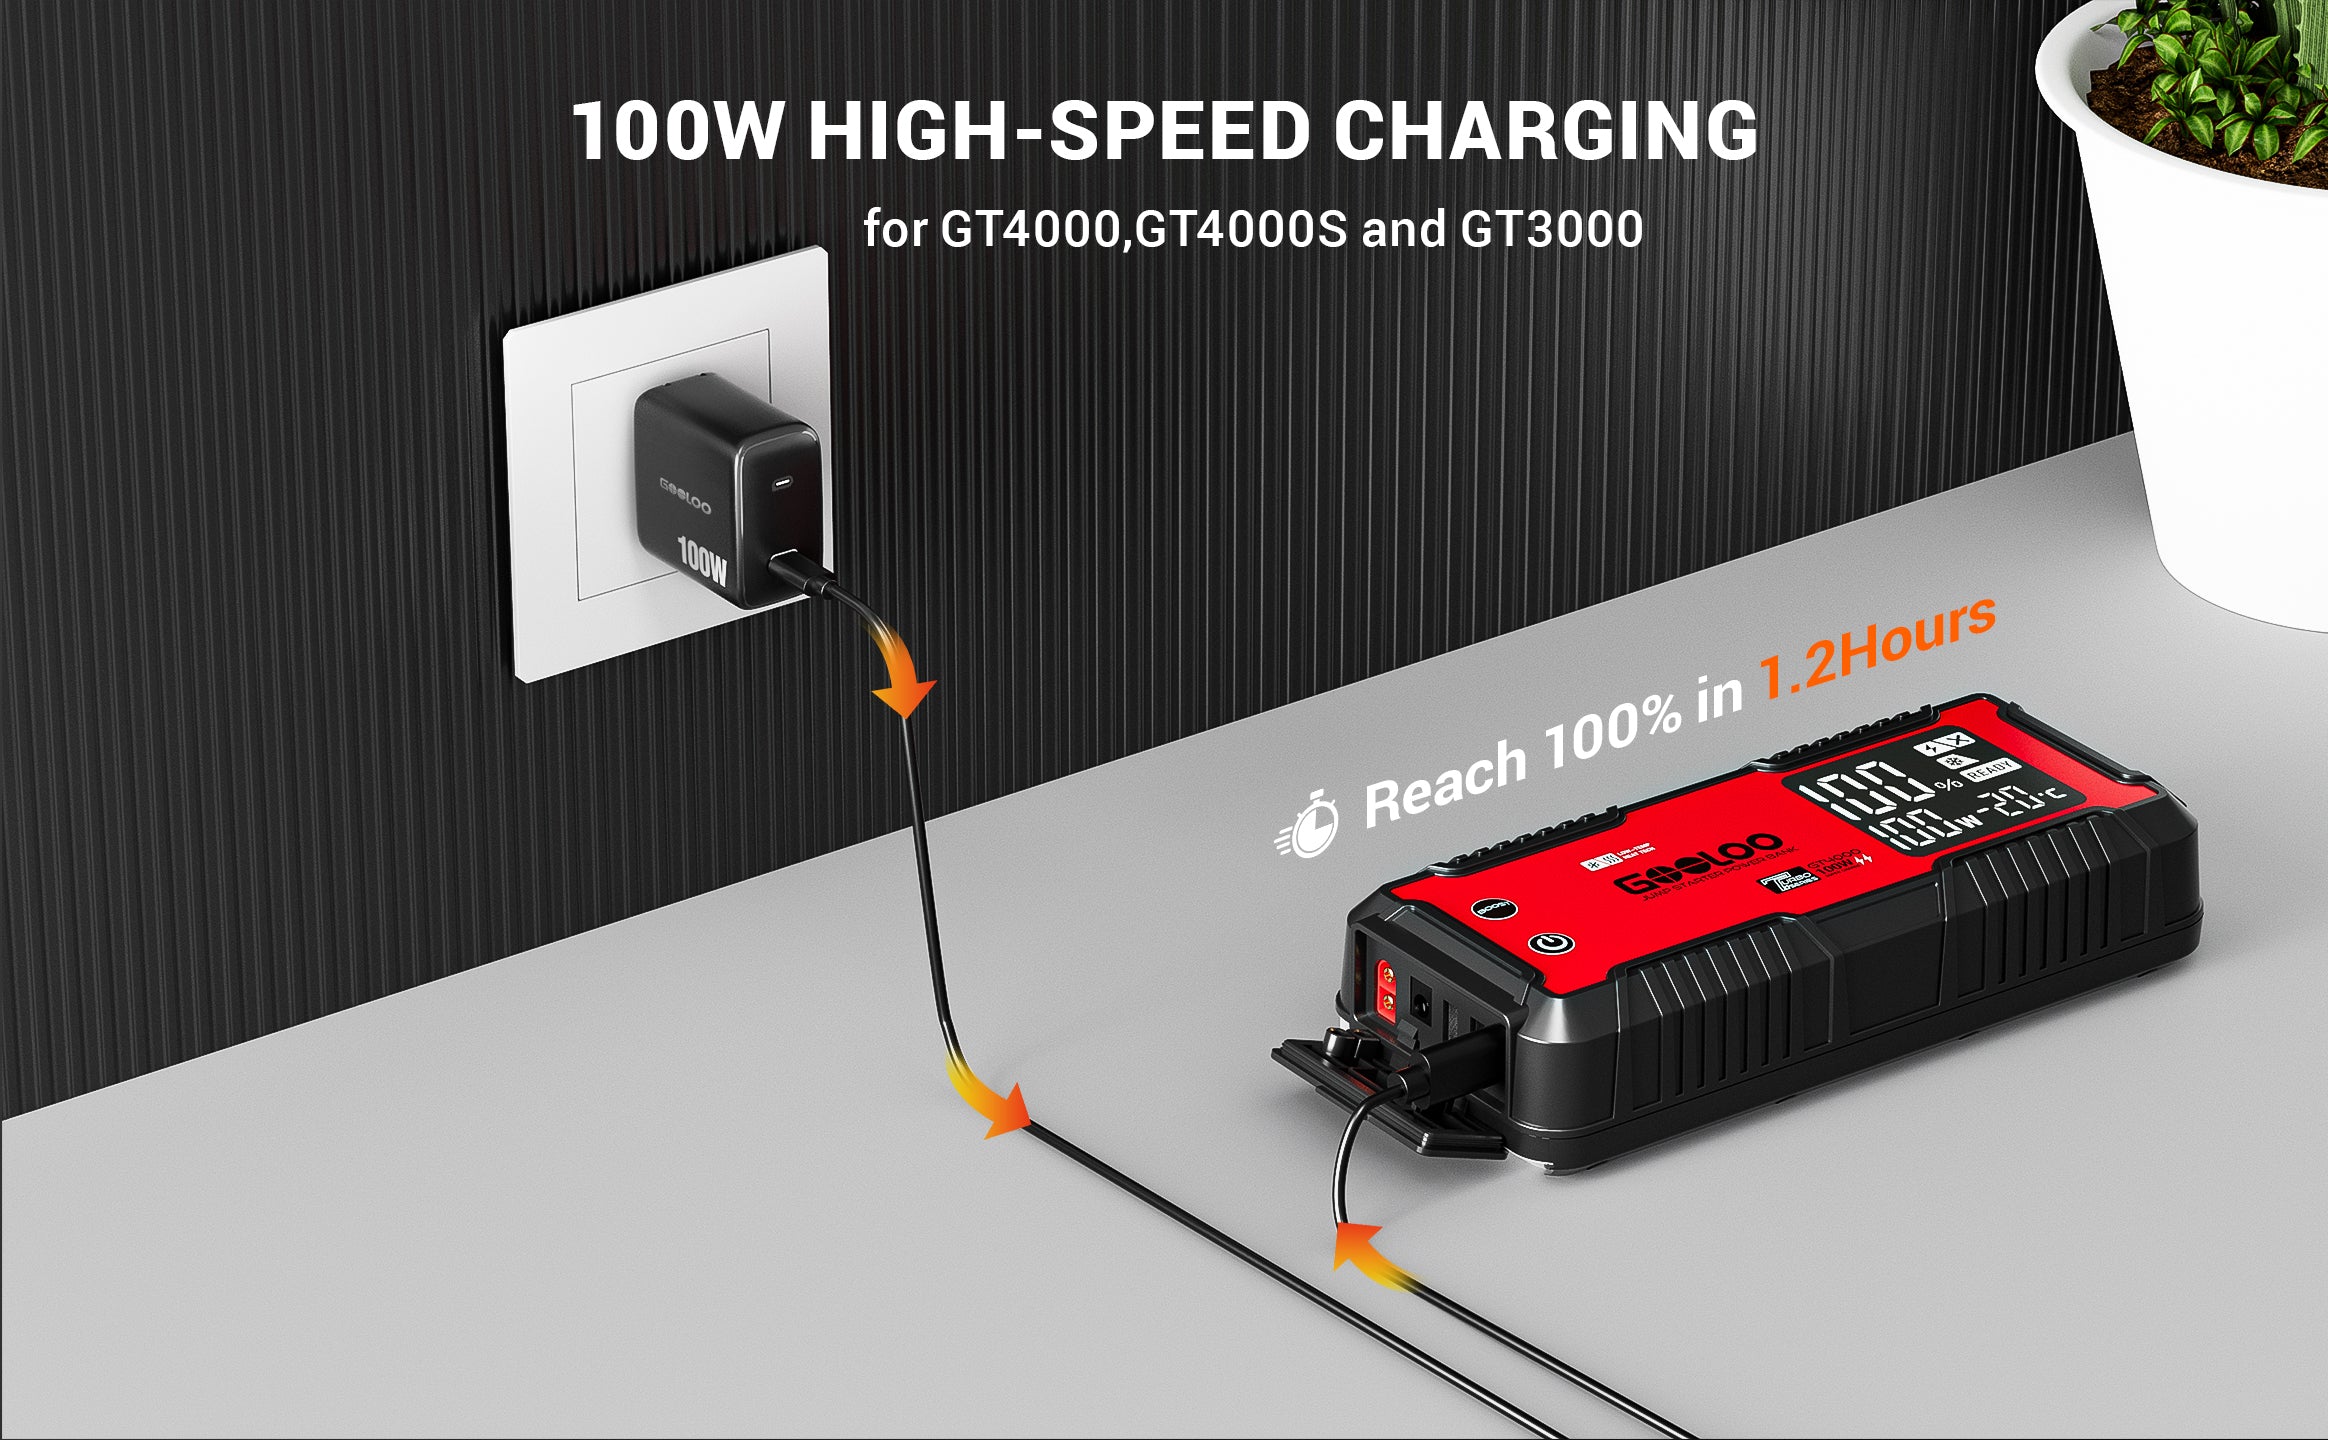 100 w wall charger for gt4000 gt3000 gt4000s high speed charging